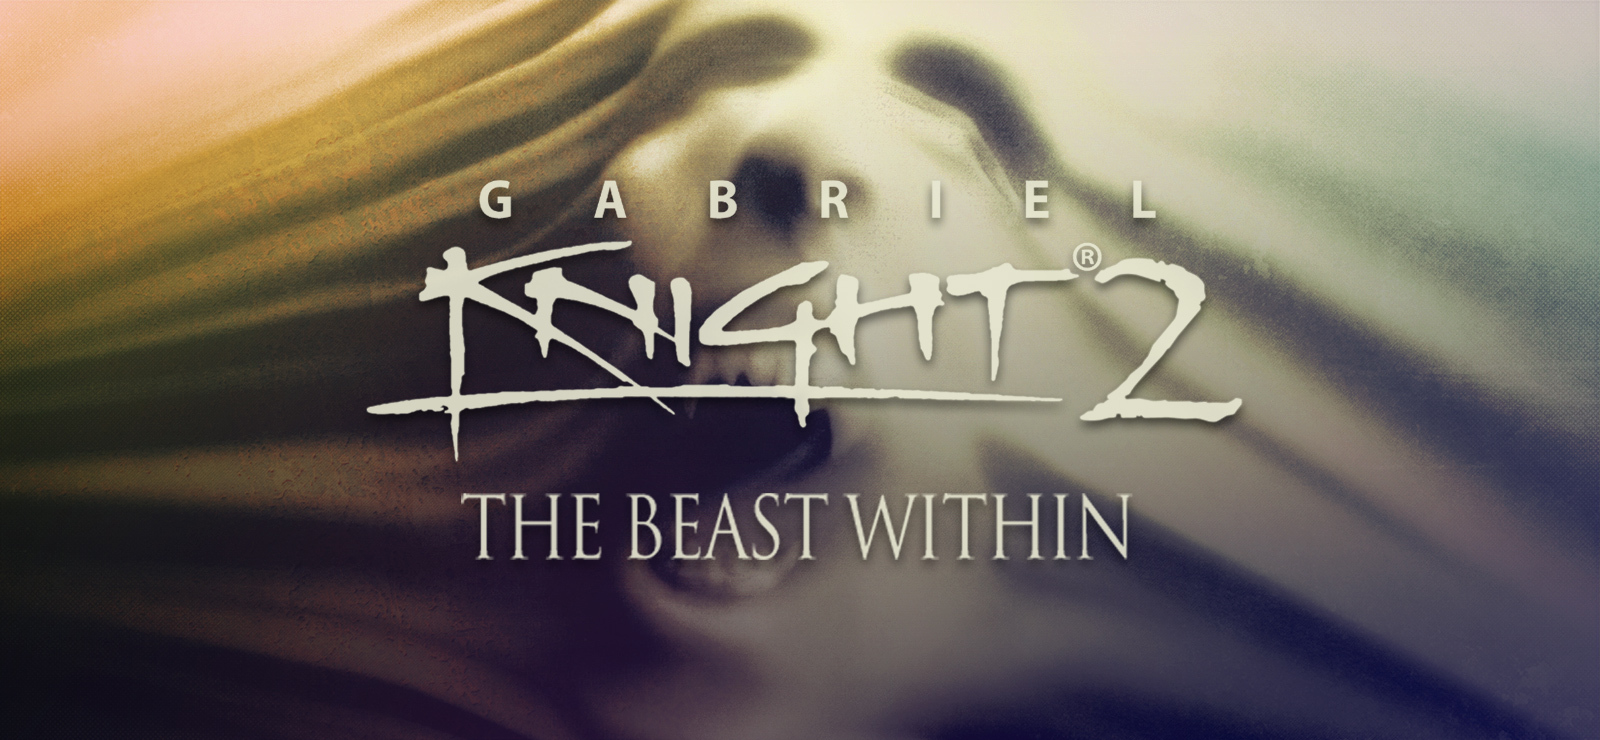 download gabriel knight the beast within